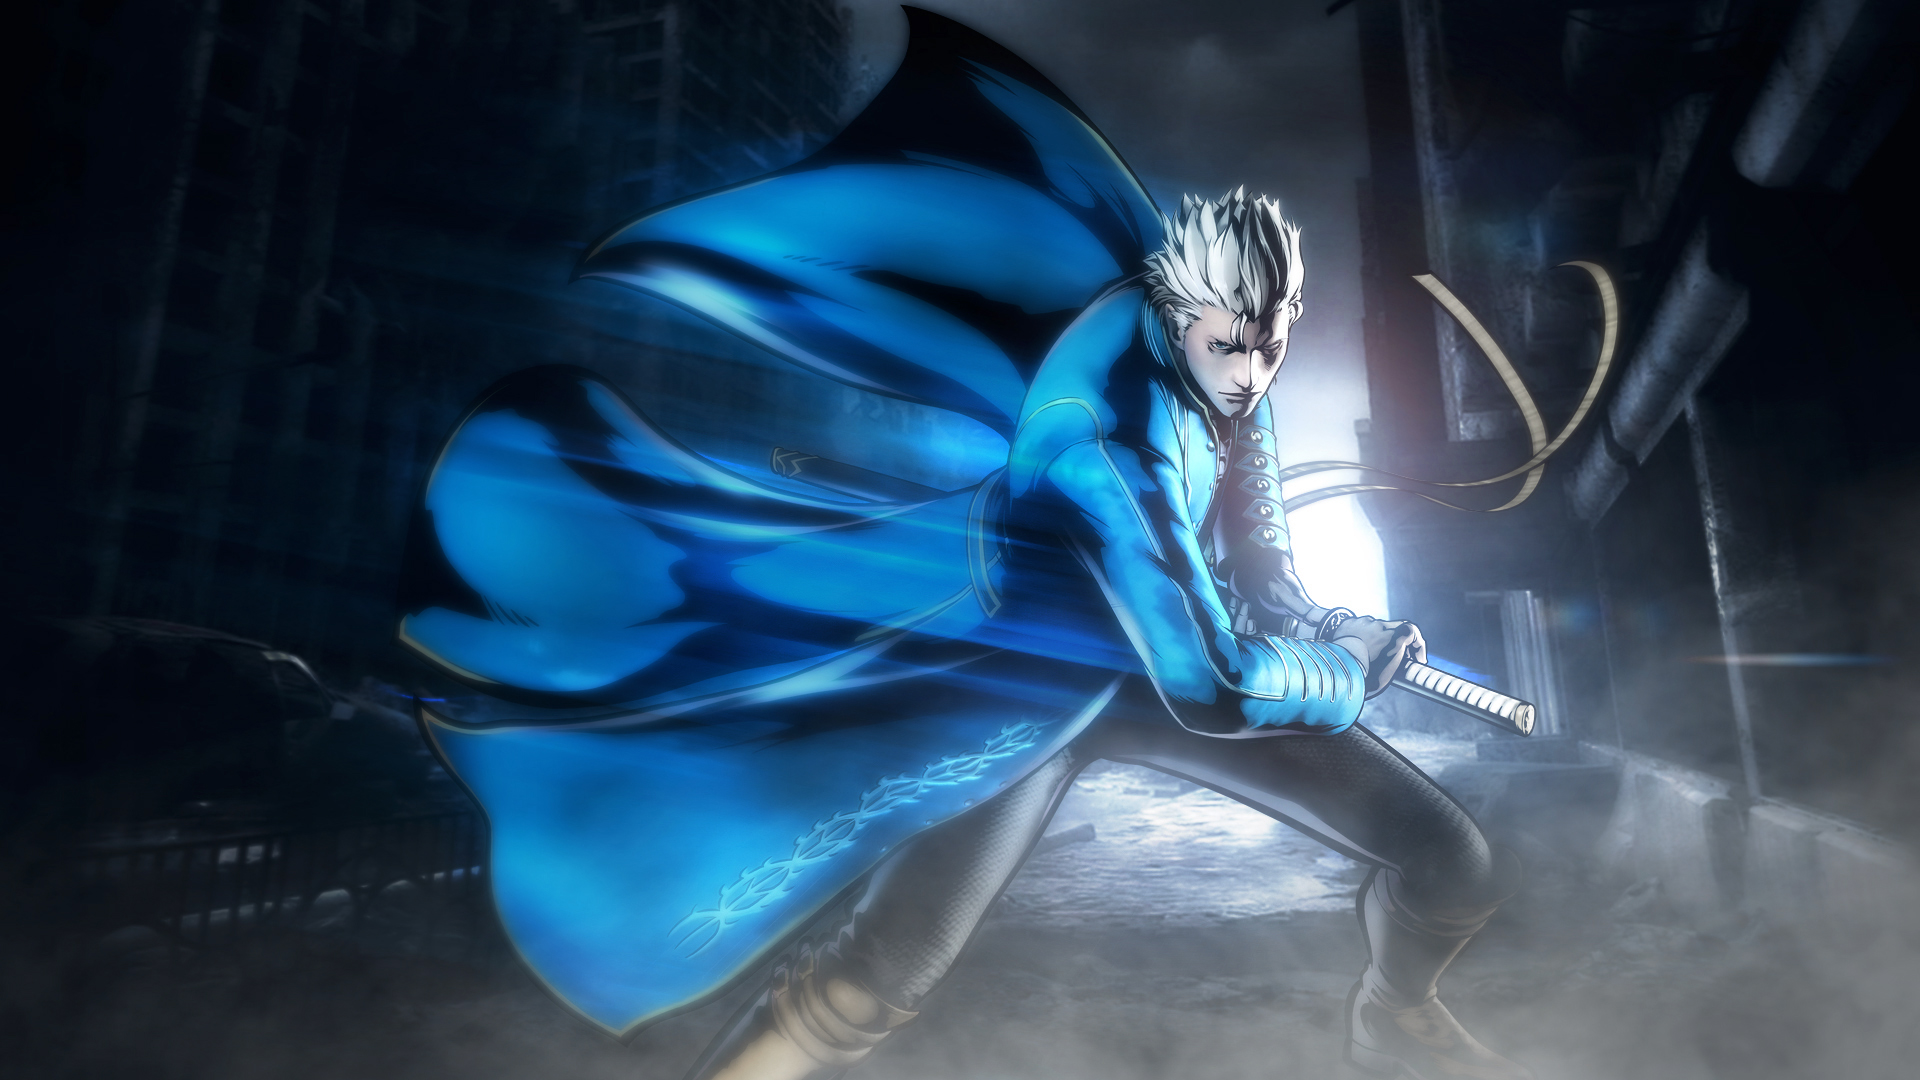 Devil May Cry Wallpaper For Android 46164 Desktop Wallpapers Top